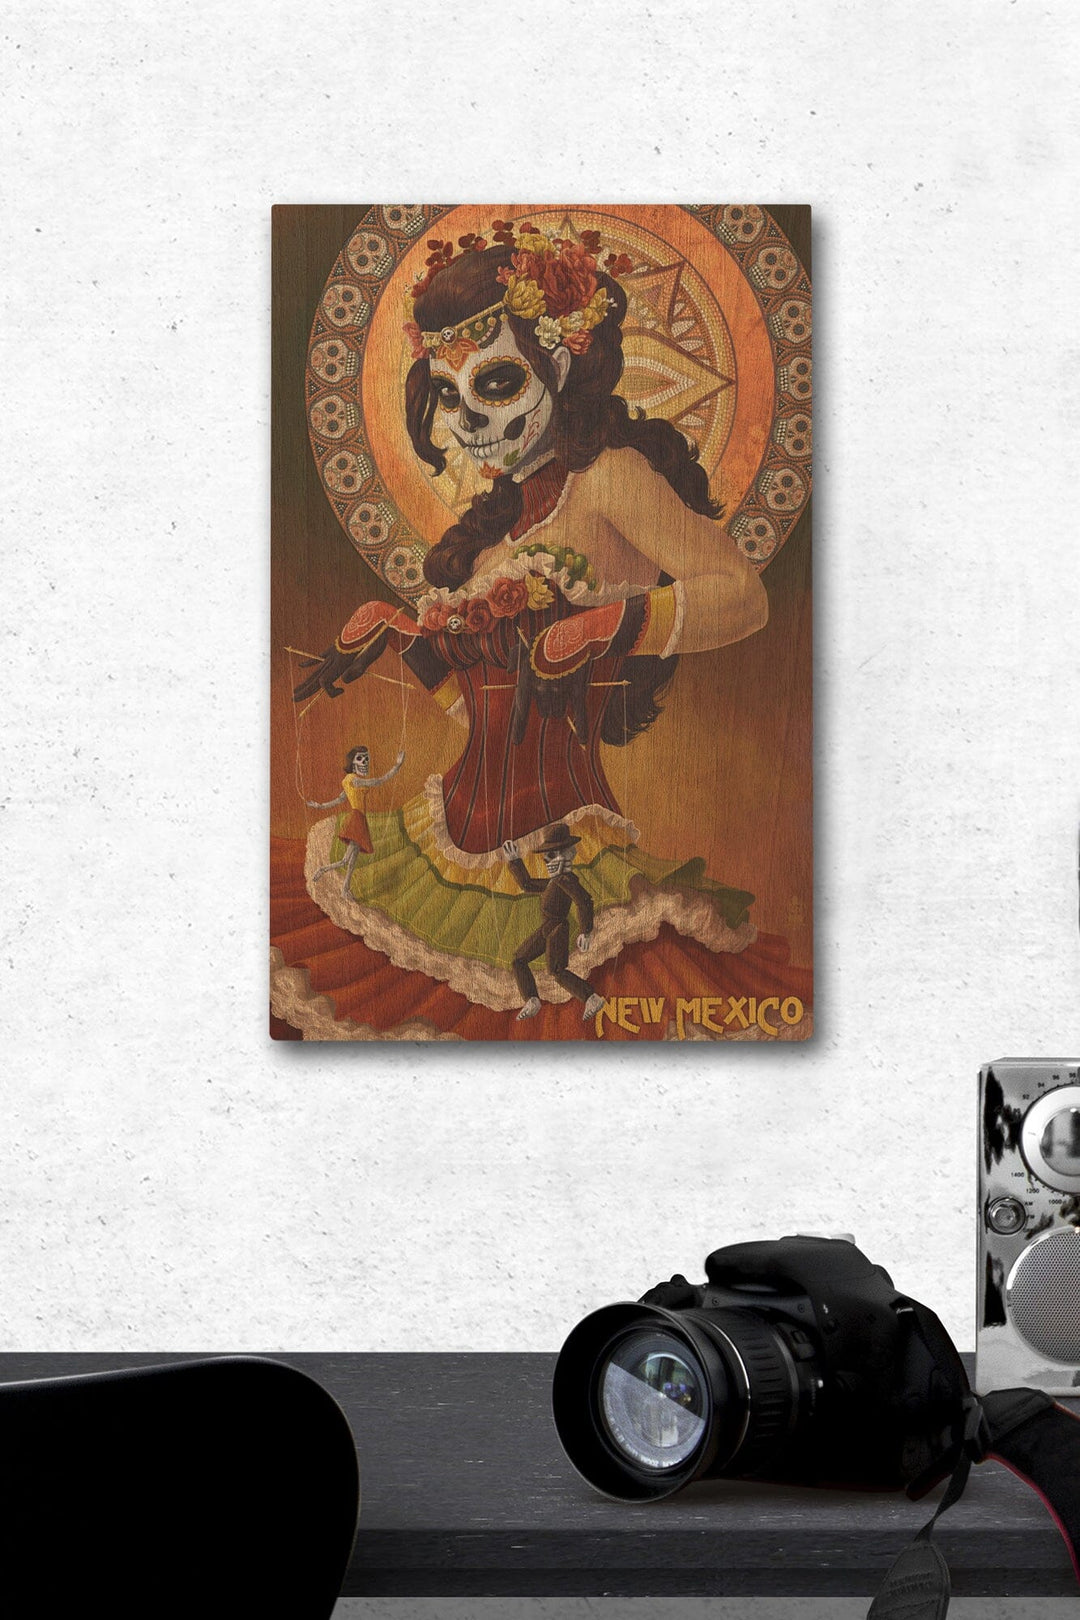 New Mexico, Day of the Dead Marionettes, Lantern Press Artwork, Wood Signs and Postcards Wood Lantern Press 12 x 18 Wood Gallery Print 